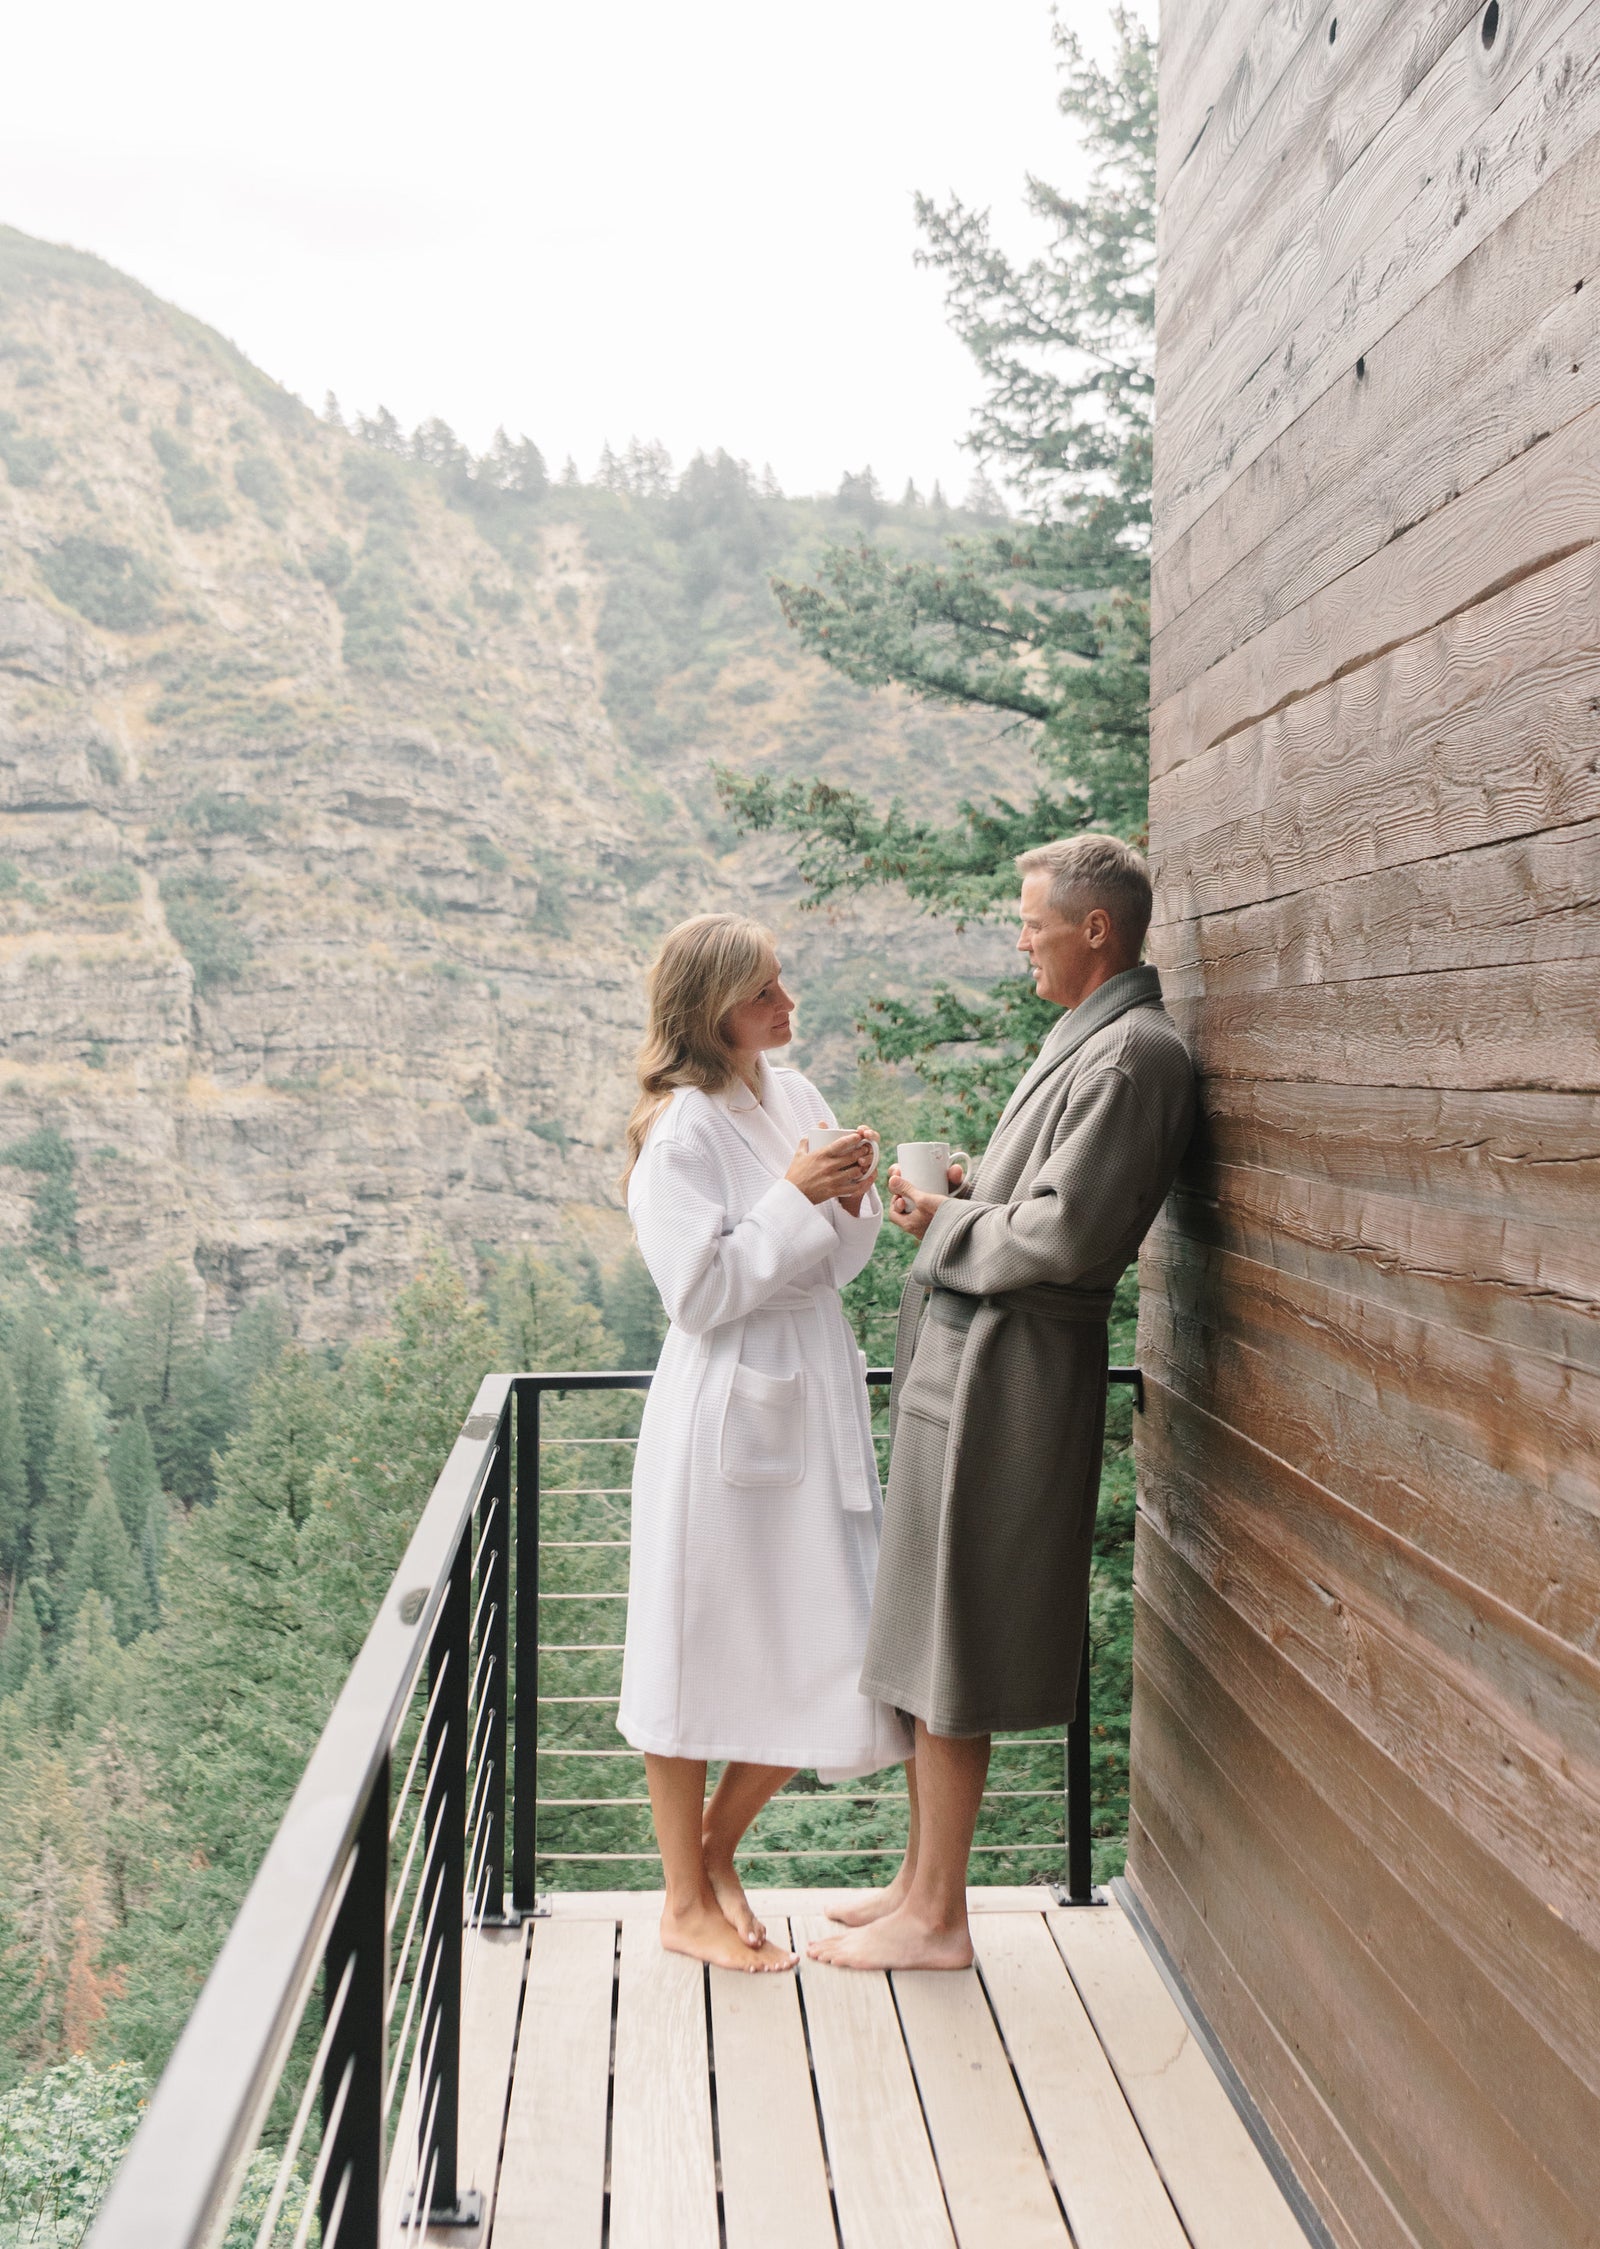 Man and woman standing on out door porch. In the background you can see a mountain and trees. The woman wears a white bathrobe and the man wheres the charcoal robe. The man and woman are holding mugs and talking with each other. 